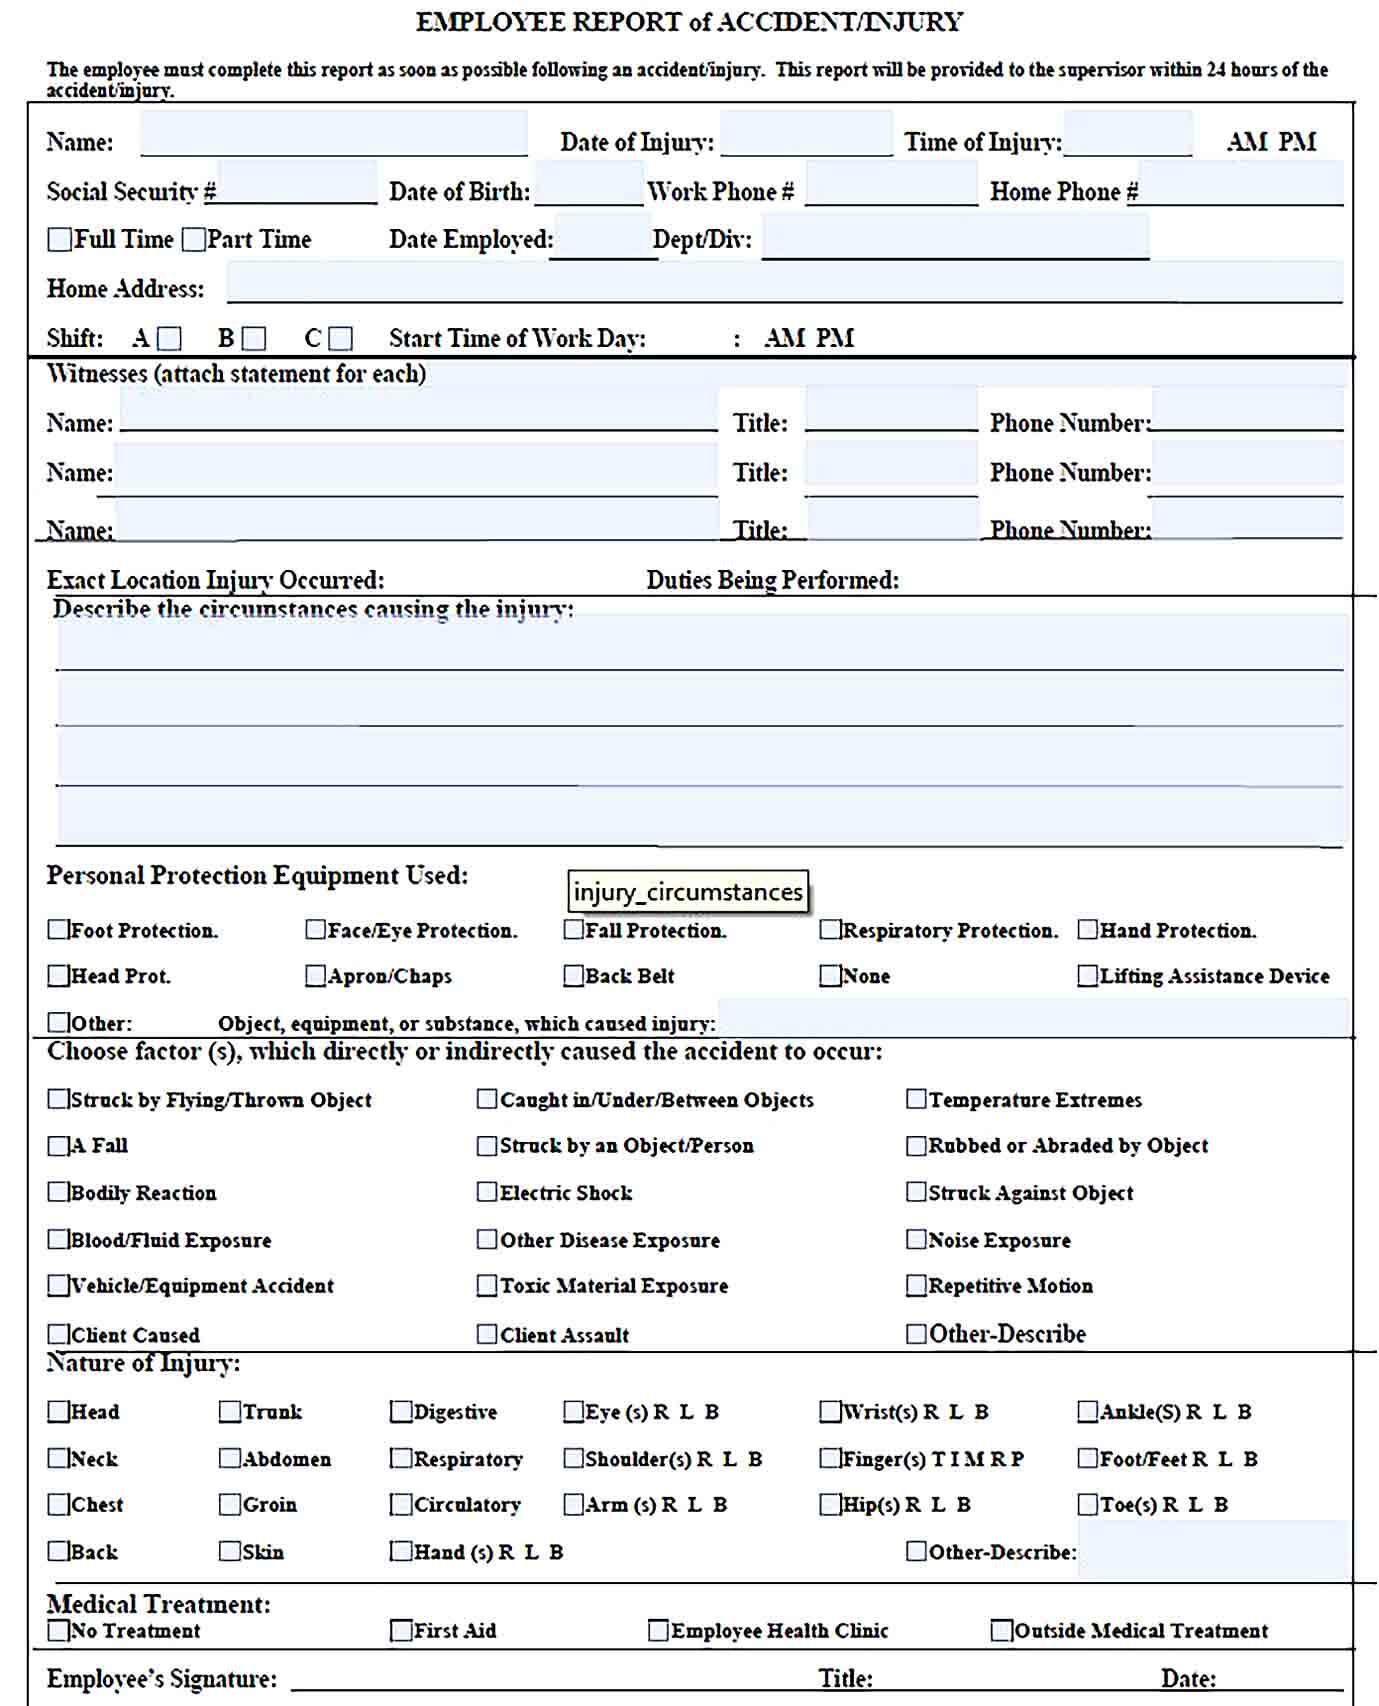 Sample Employee Accident Report